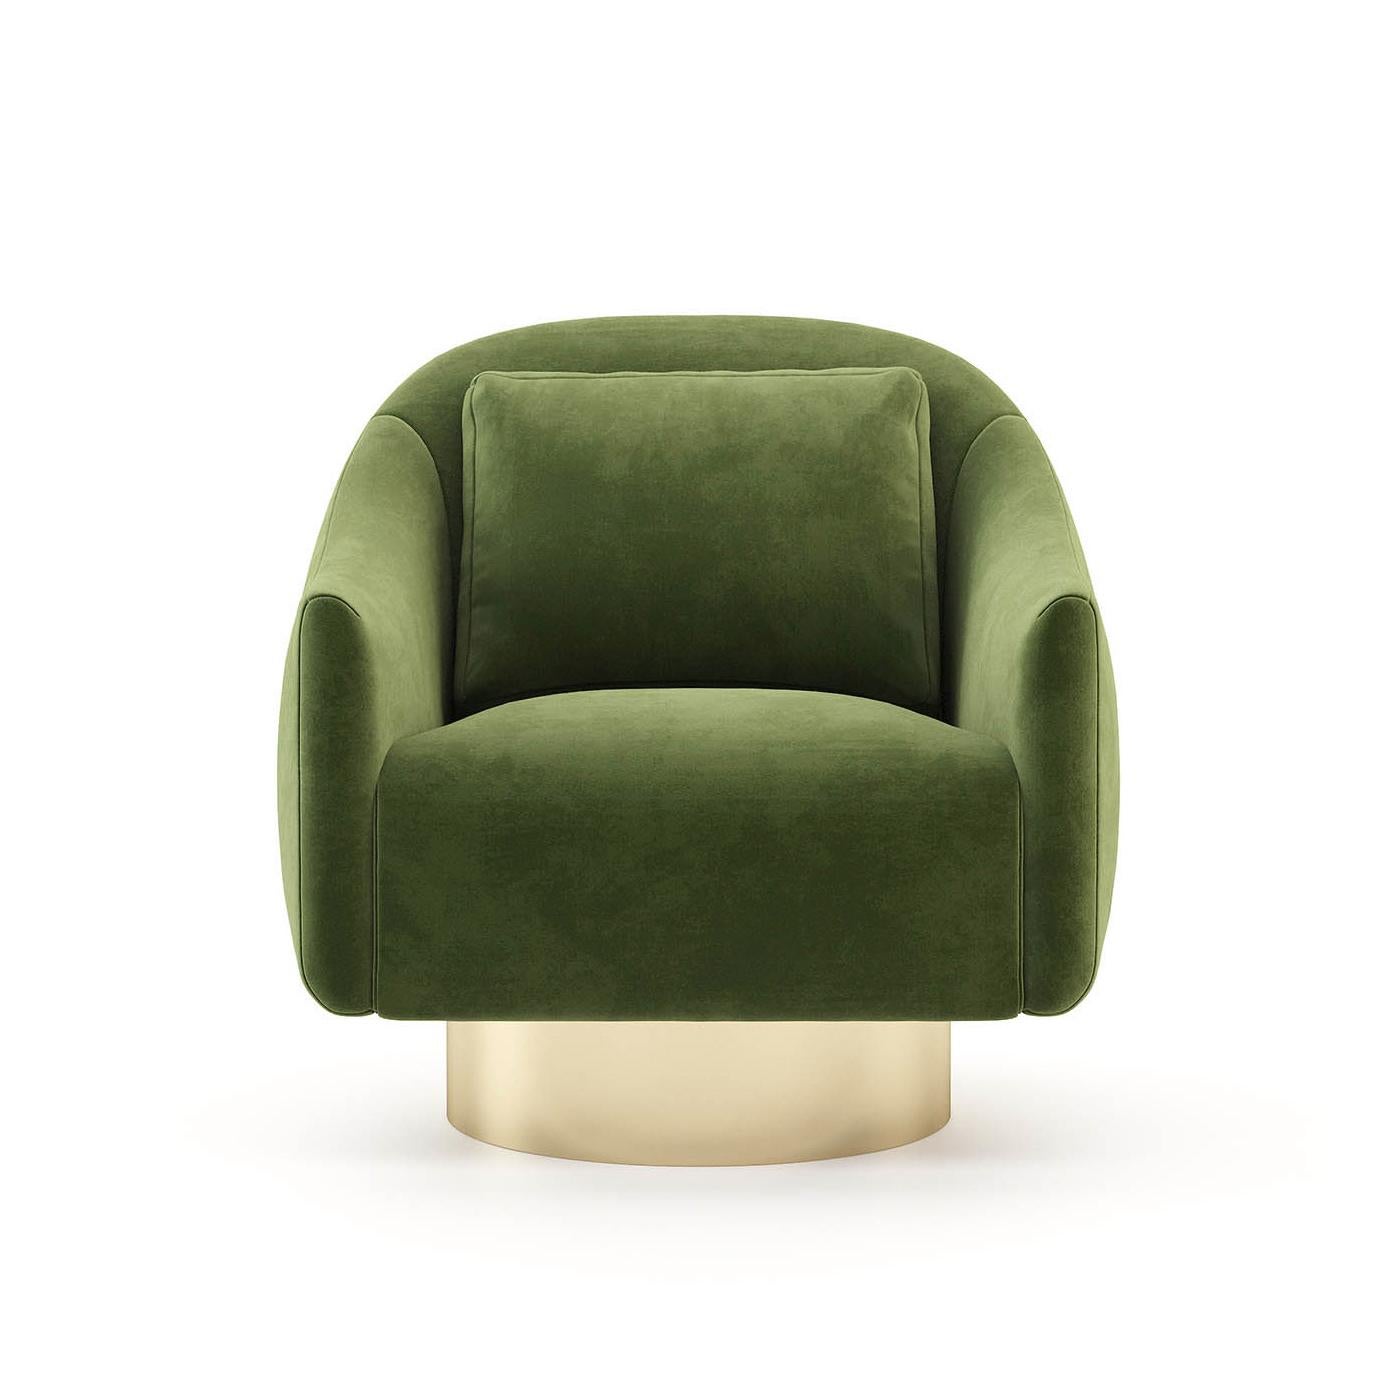 Armchair Howard with structure in solid wood,
upholstered and covered with high quality green
velvet fabric. With polished stainless steel base in
gold finish. Also available with other fabrics on request.